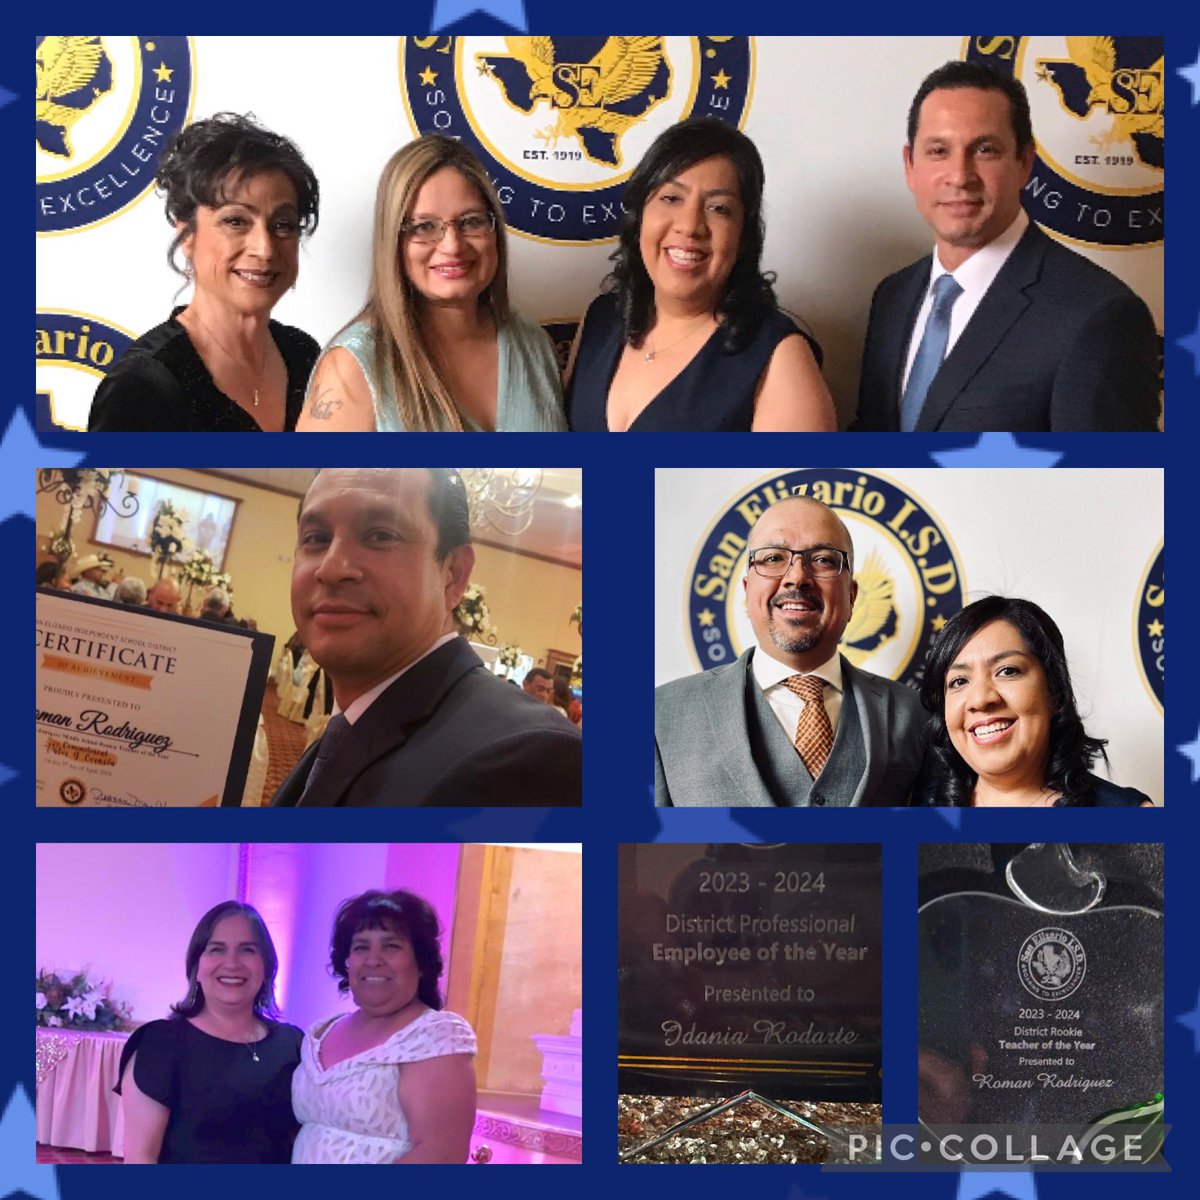 Jumping for joy to finish the work week with high energy. Proud to labor alongside these dedicated educators & SUPER proud @ SEISD’s Gala hearing these GEMS RockStars honored. 🎸💙💛#Hititouttathepark #ShineBright 💎🦅🏆@GemsBooktique 2x🏆@GEMS_NJHS 🏆@EspieLopez4 @GEMS_RSalcido